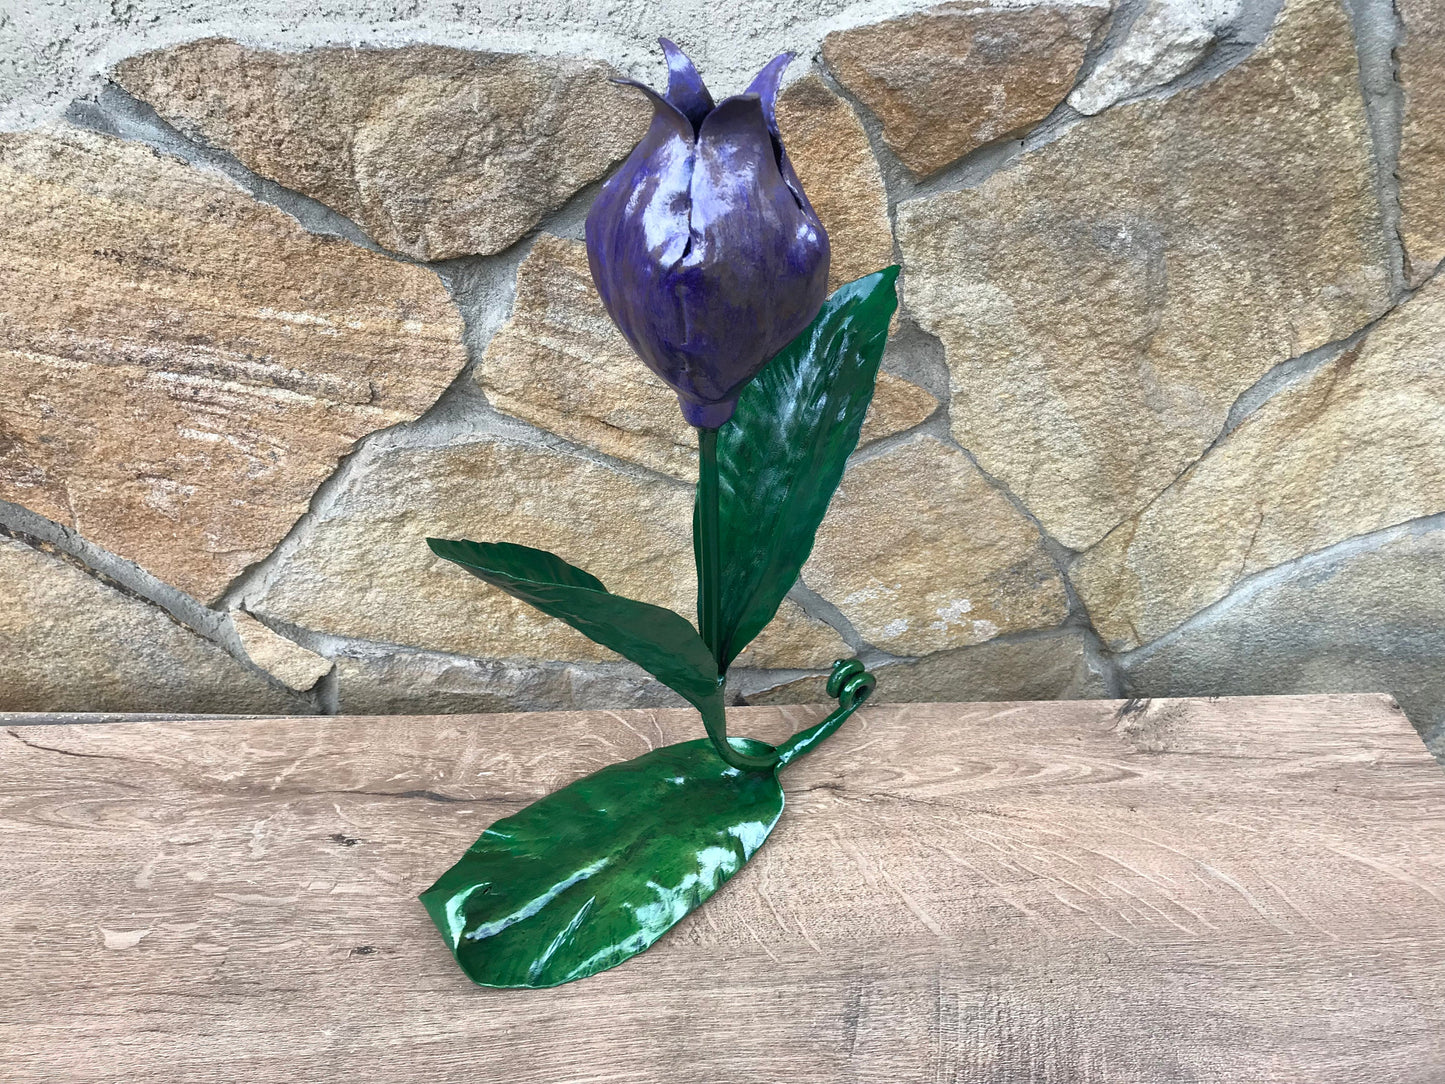 Tulip, iron tulip, iron gift for her, iron anniversary gift, iron gifts, Mother's day gift, 6th anniversary, iron flower, hand forged flower